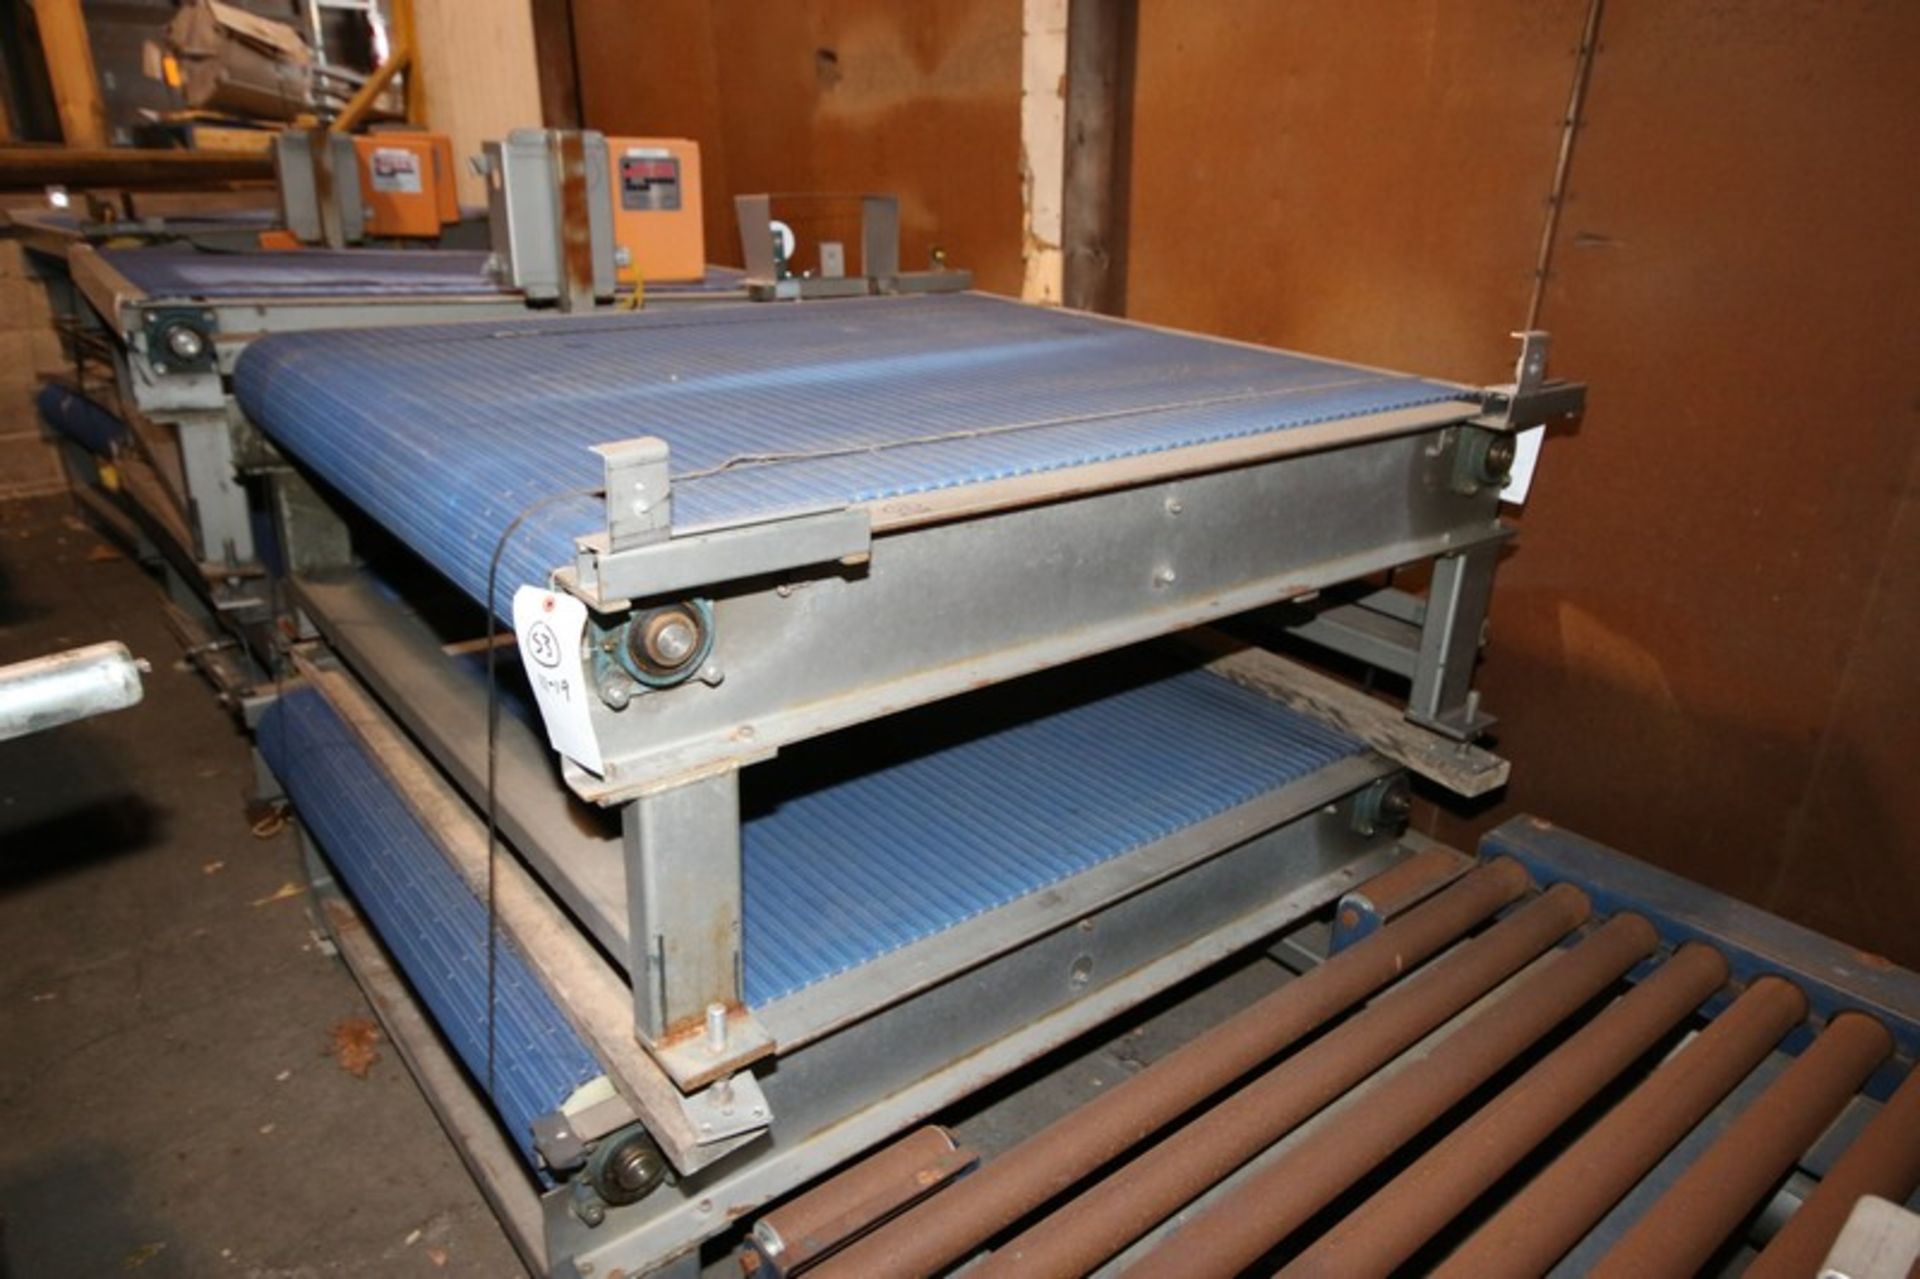 6-Sections of H&CS Conveyors, Overall Dims.: Aprox. 60" L x 64" W x 36" H, with Plastic Blue Belt, - Image 5 of 7